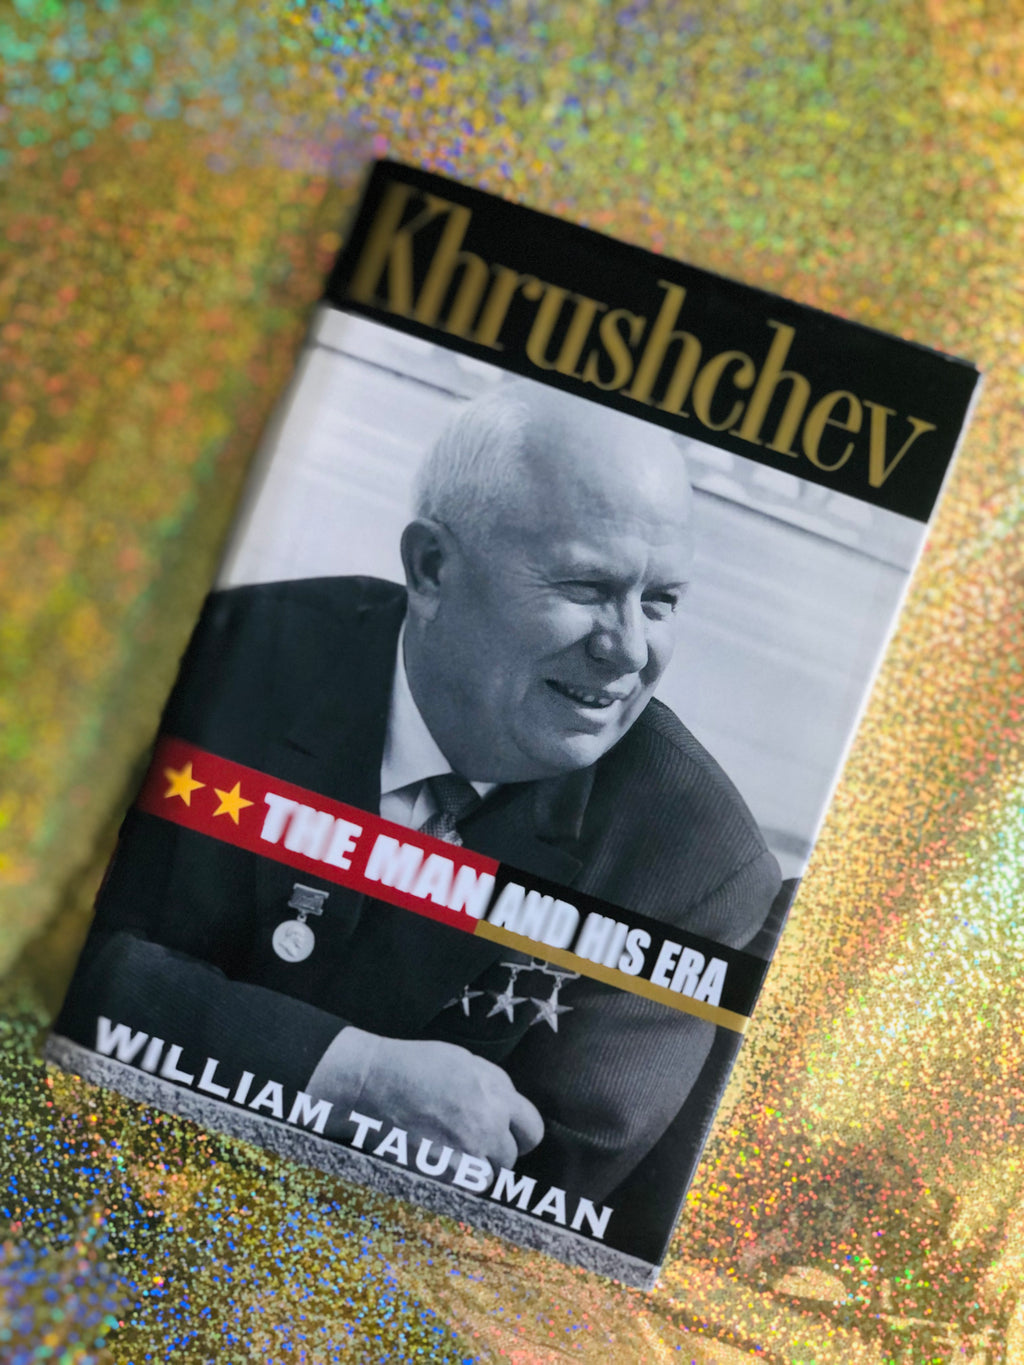 Khrushchev: The Man And His Era- By William Taubman